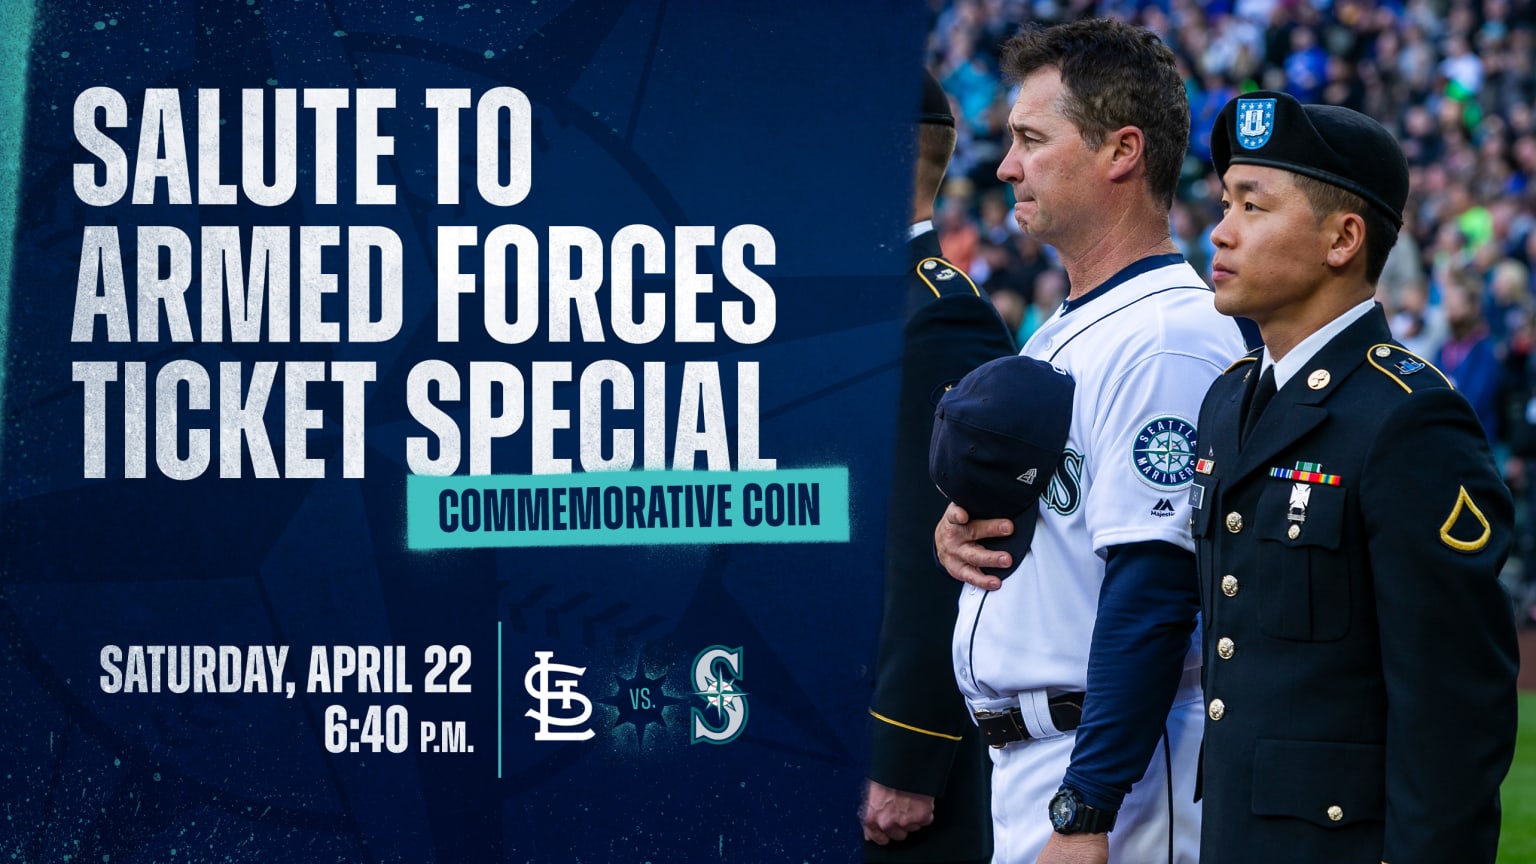 Mariners and MLB Honor Veterans on Memorial Day